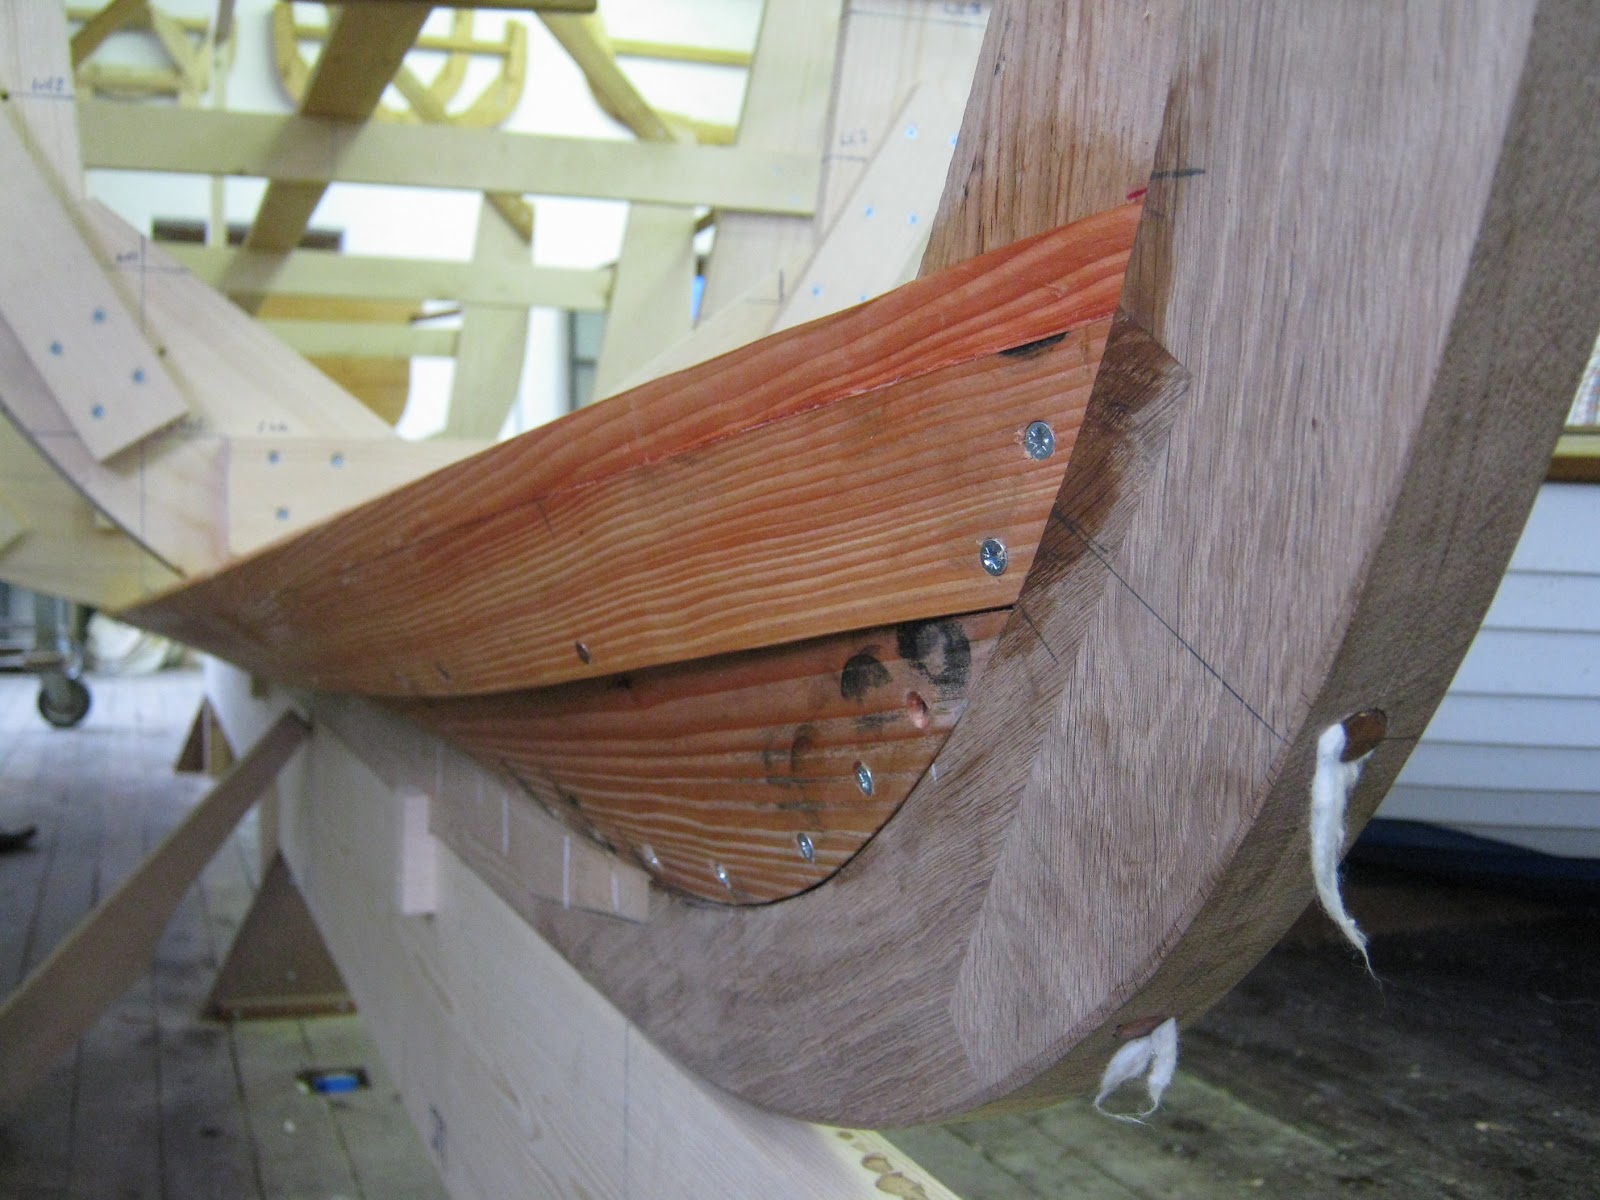 How to build a wooden plank boat | zetta